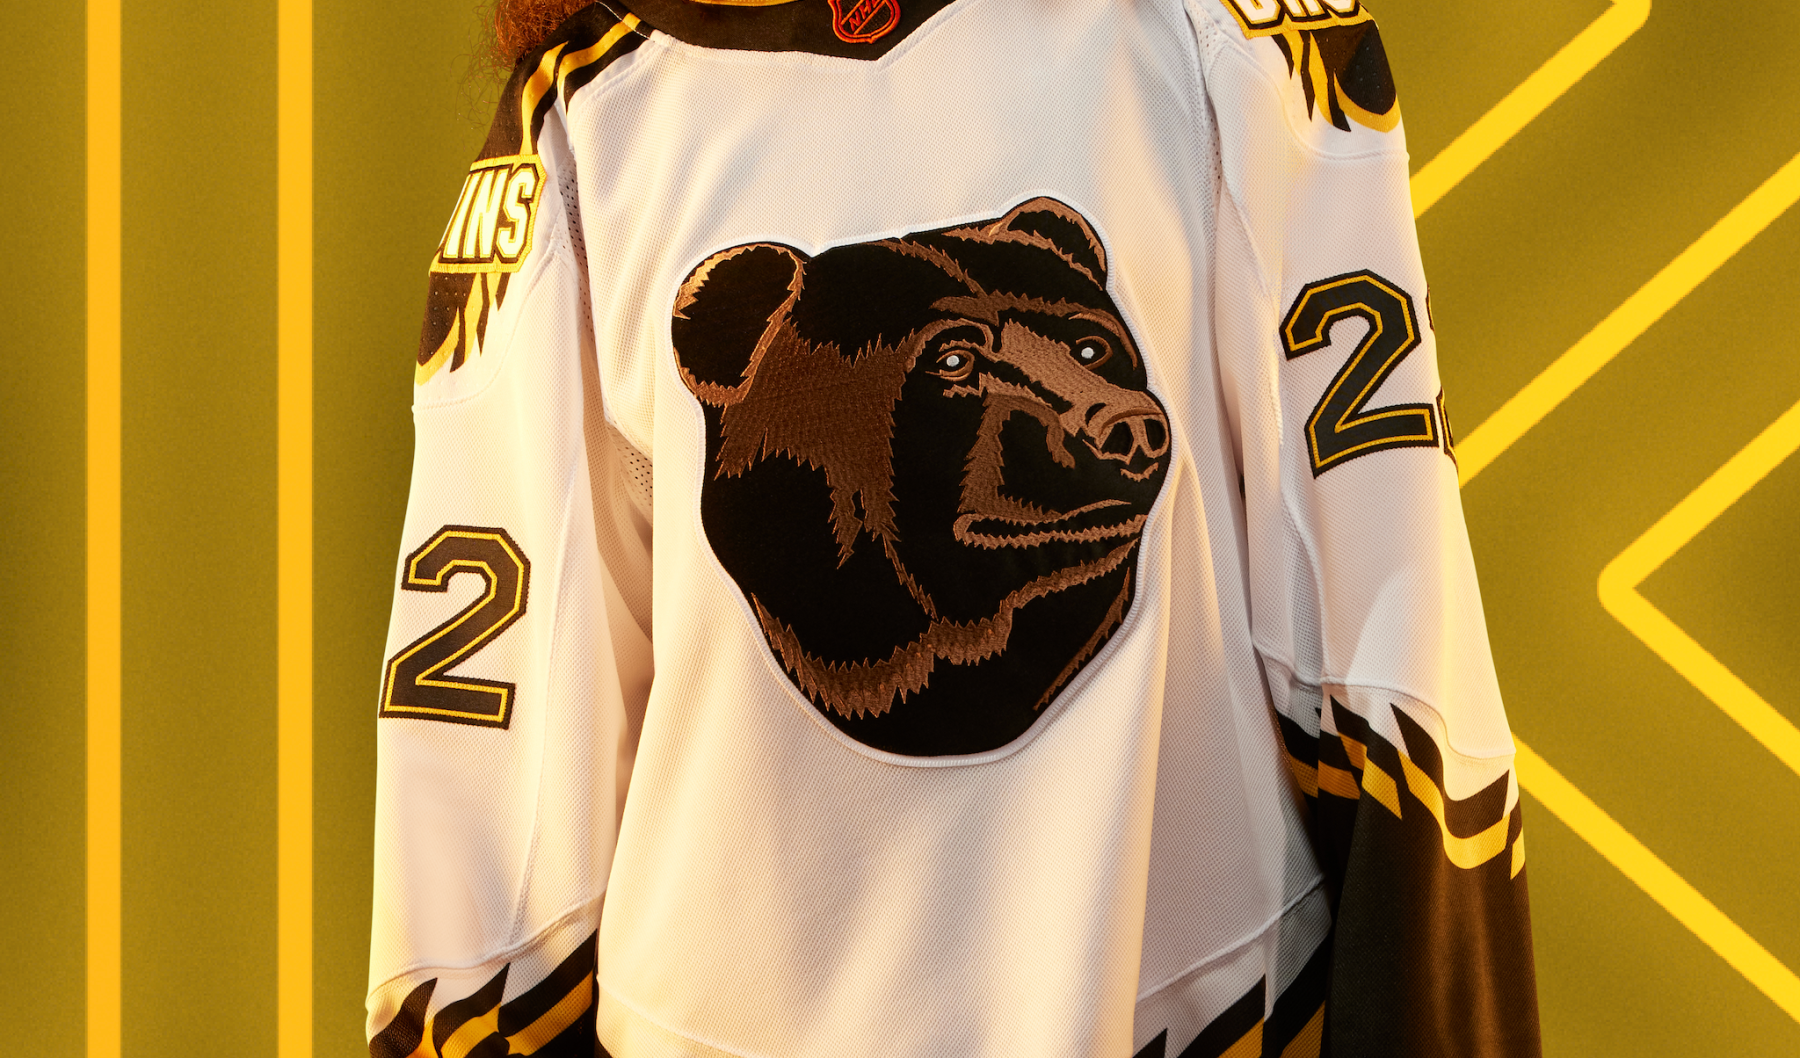 We knew this was going to be a highly-requested design because it’s simply iconic. The Bruins 1995 uniform was gold and we’ve remixed it in white, but the star of the show here is that legendary “Pooh Bear” logo.